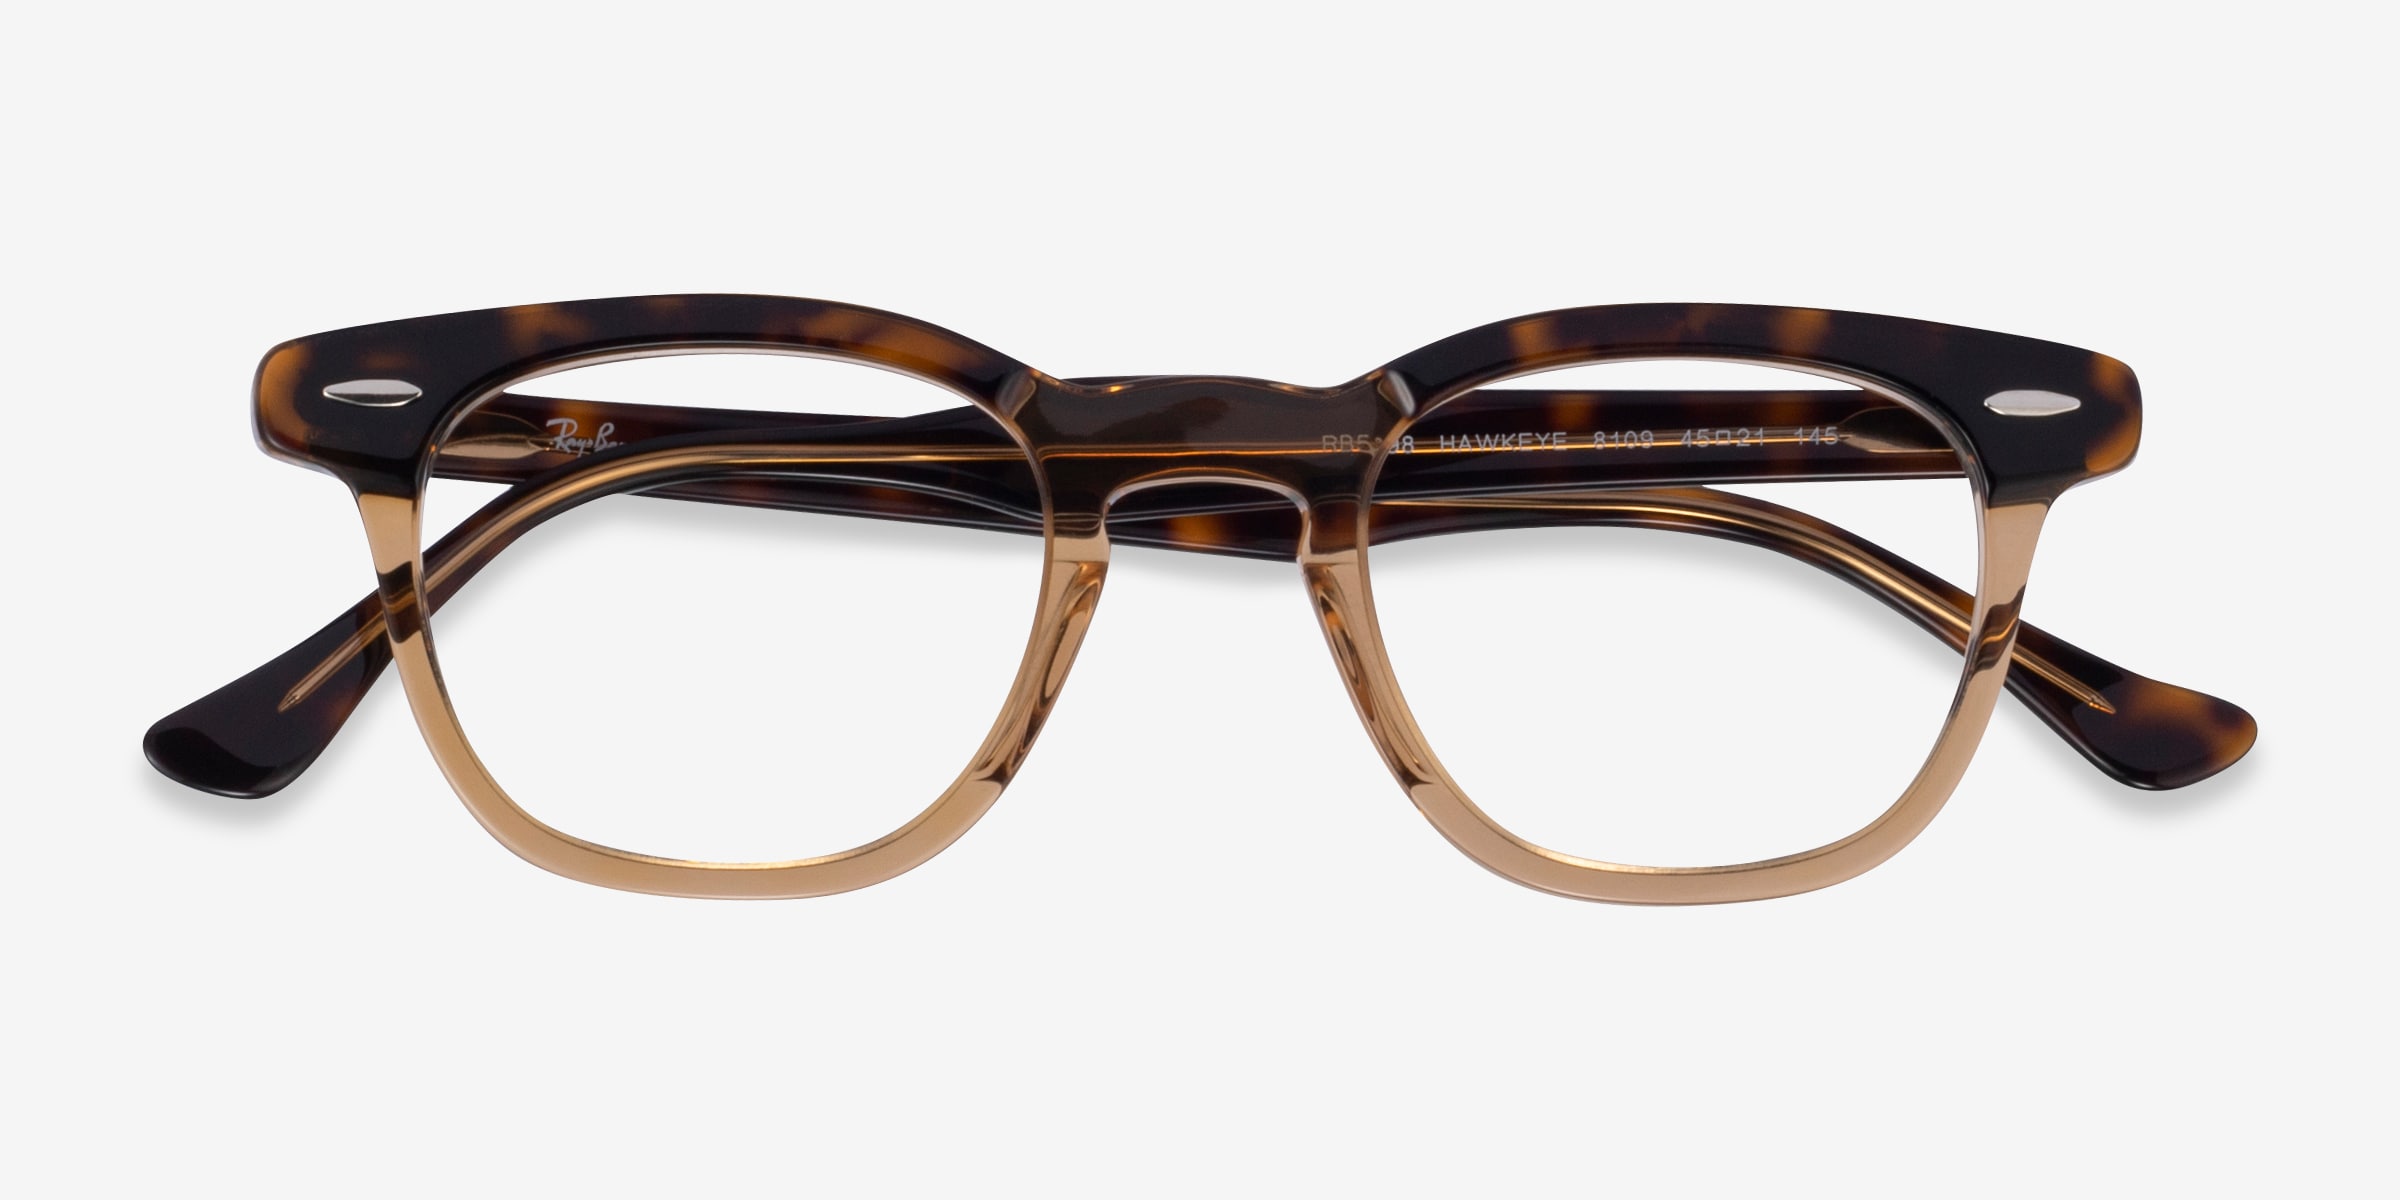 Ray-Ban RB5398 Hawkeye - Square Tortoise Transparent Brown Frame